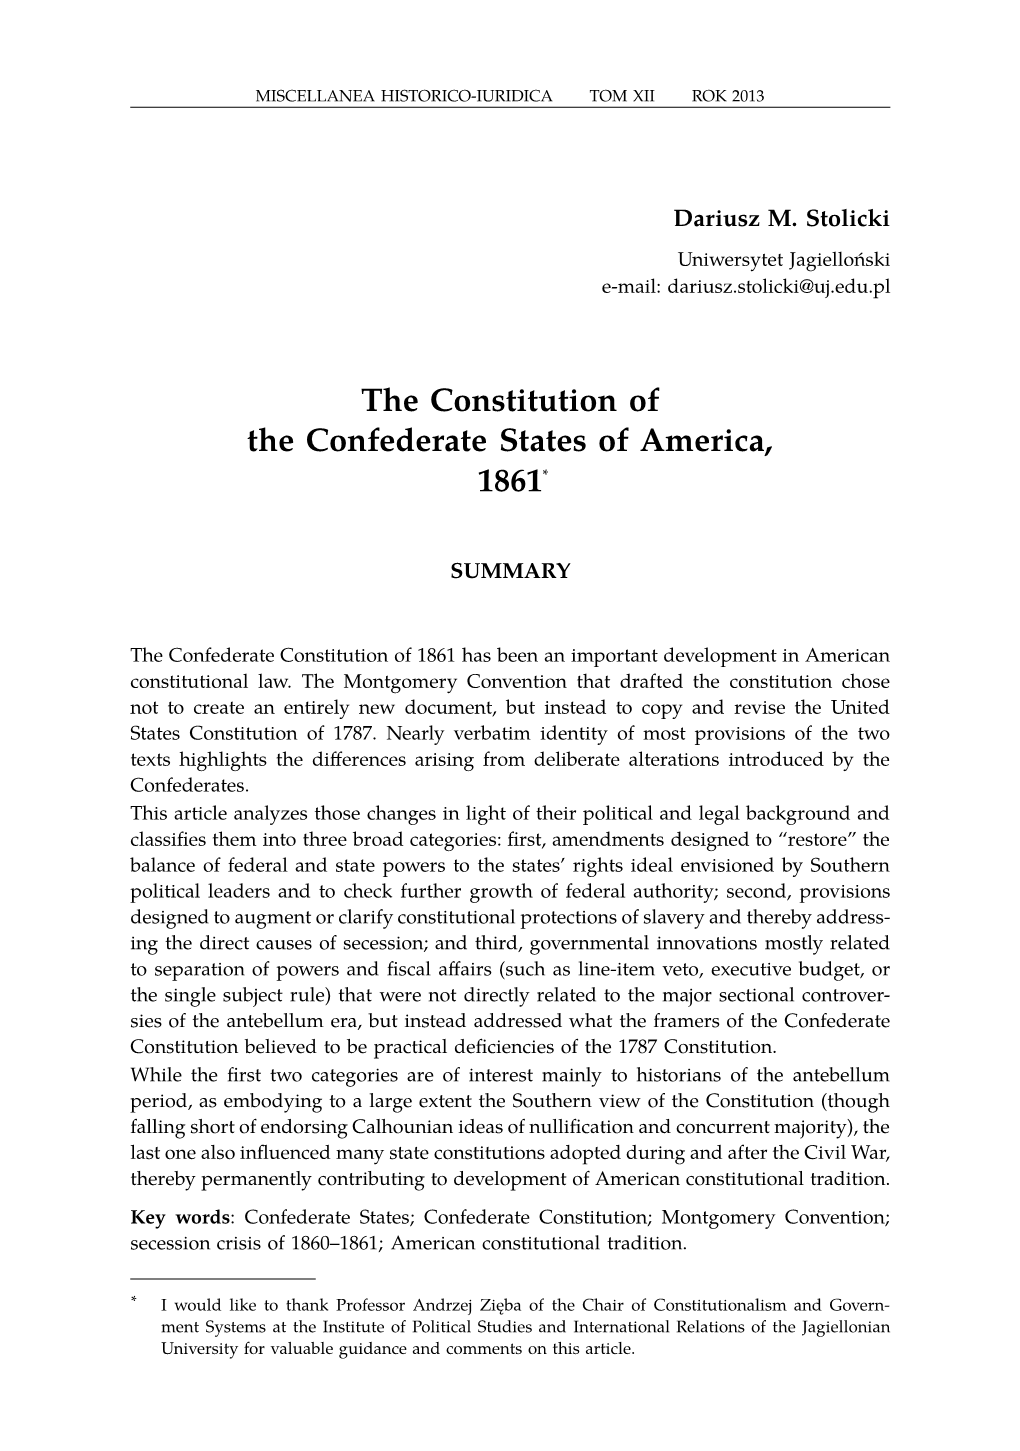 The Constitution of the Confederate States of America, 1861*